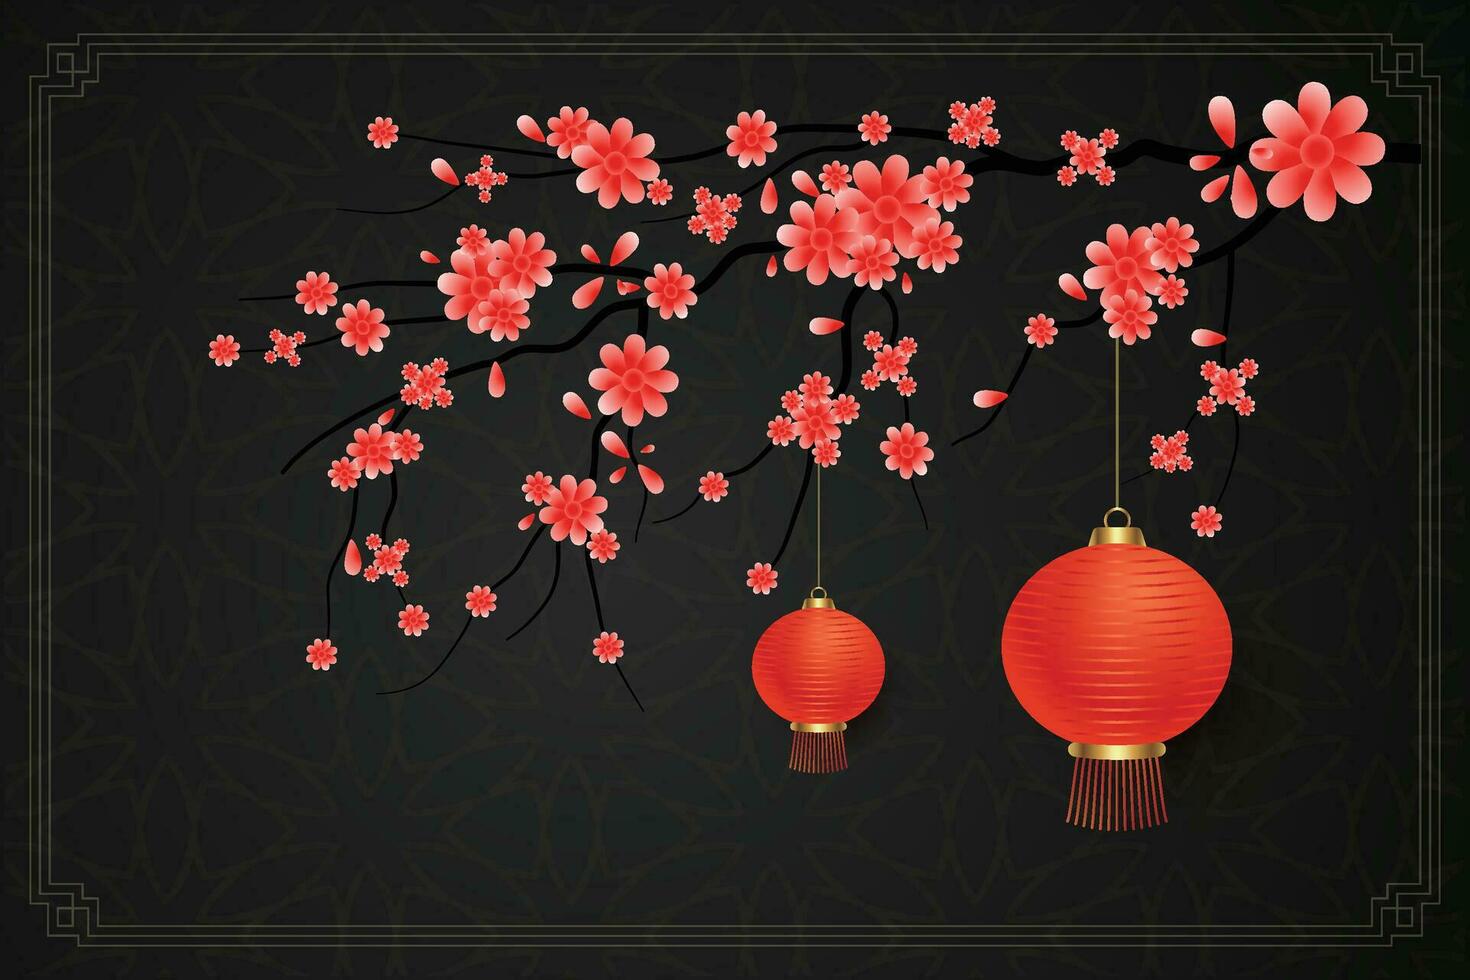 Chinese Lunar New Year festival 2024 celebration, Happy New Year background decorative elements. vector